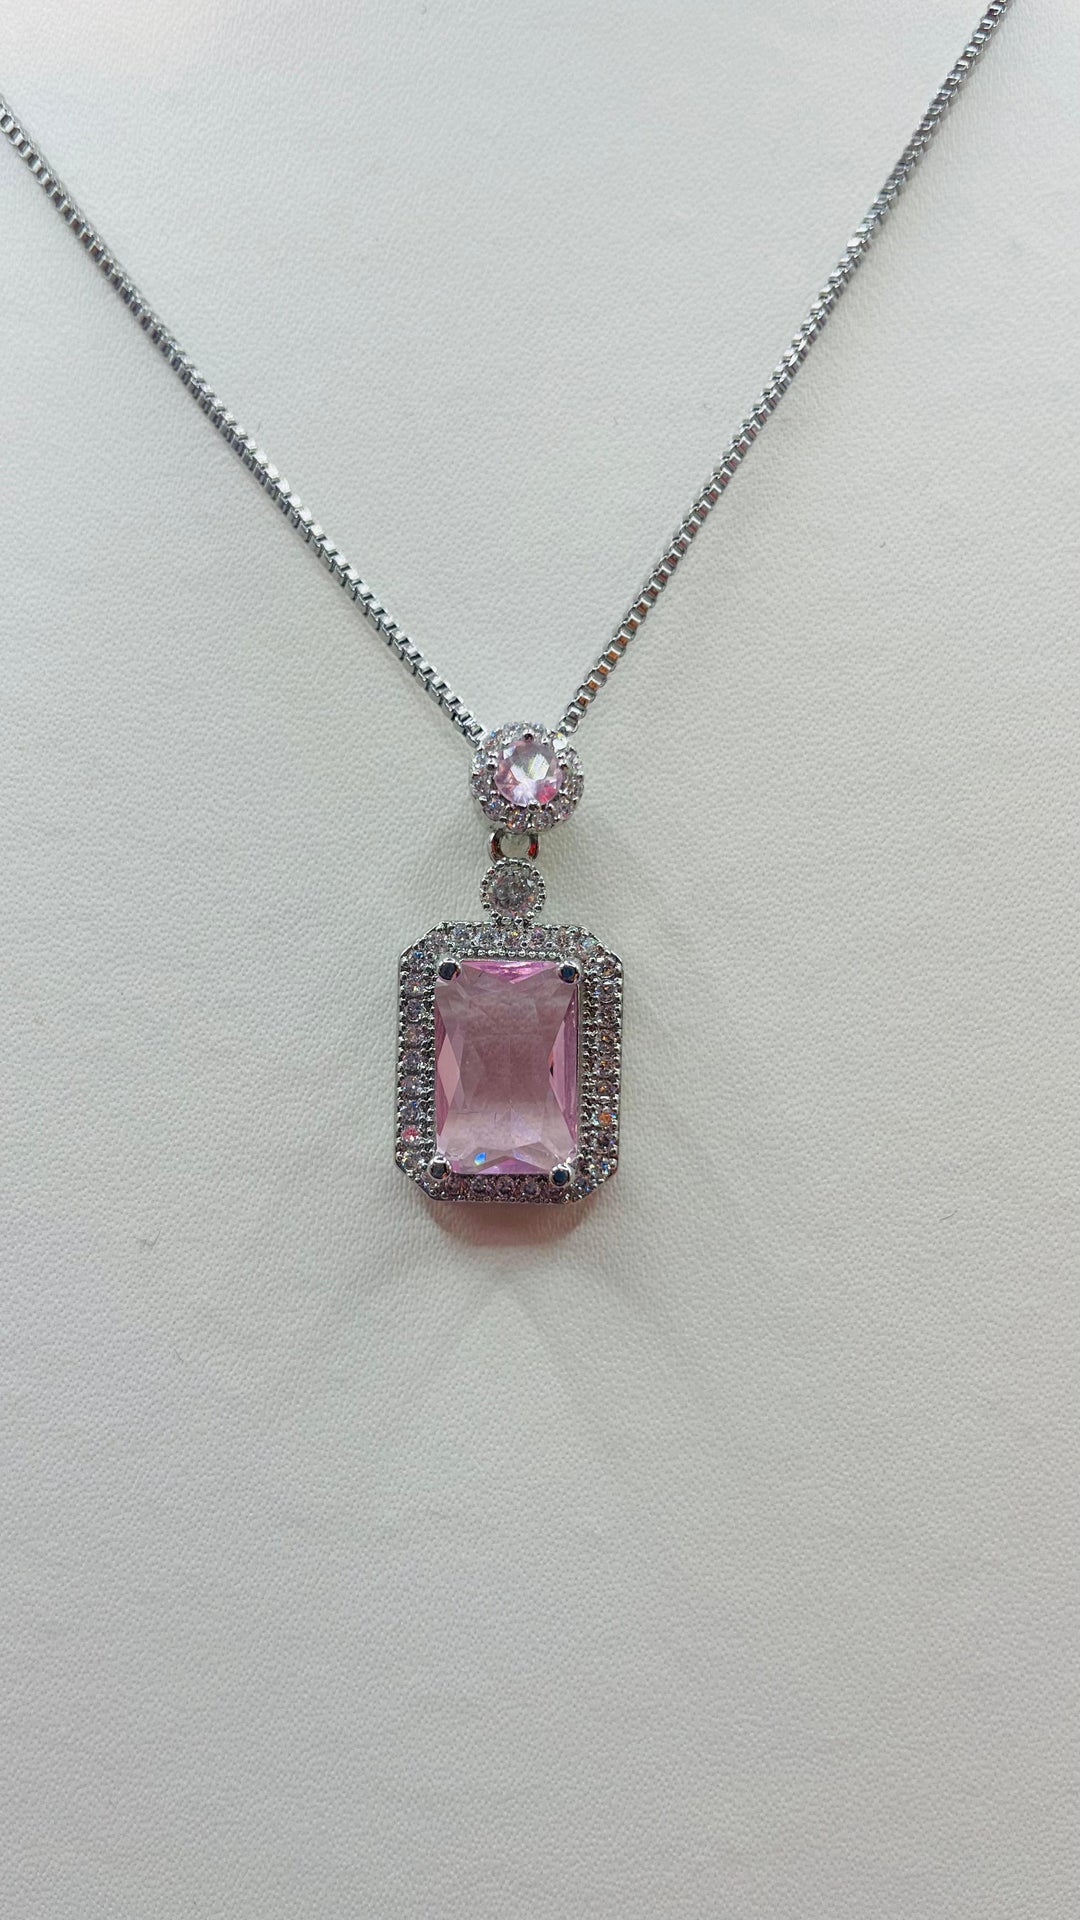 Our "Zuhi'' Silver with Pink Pendent